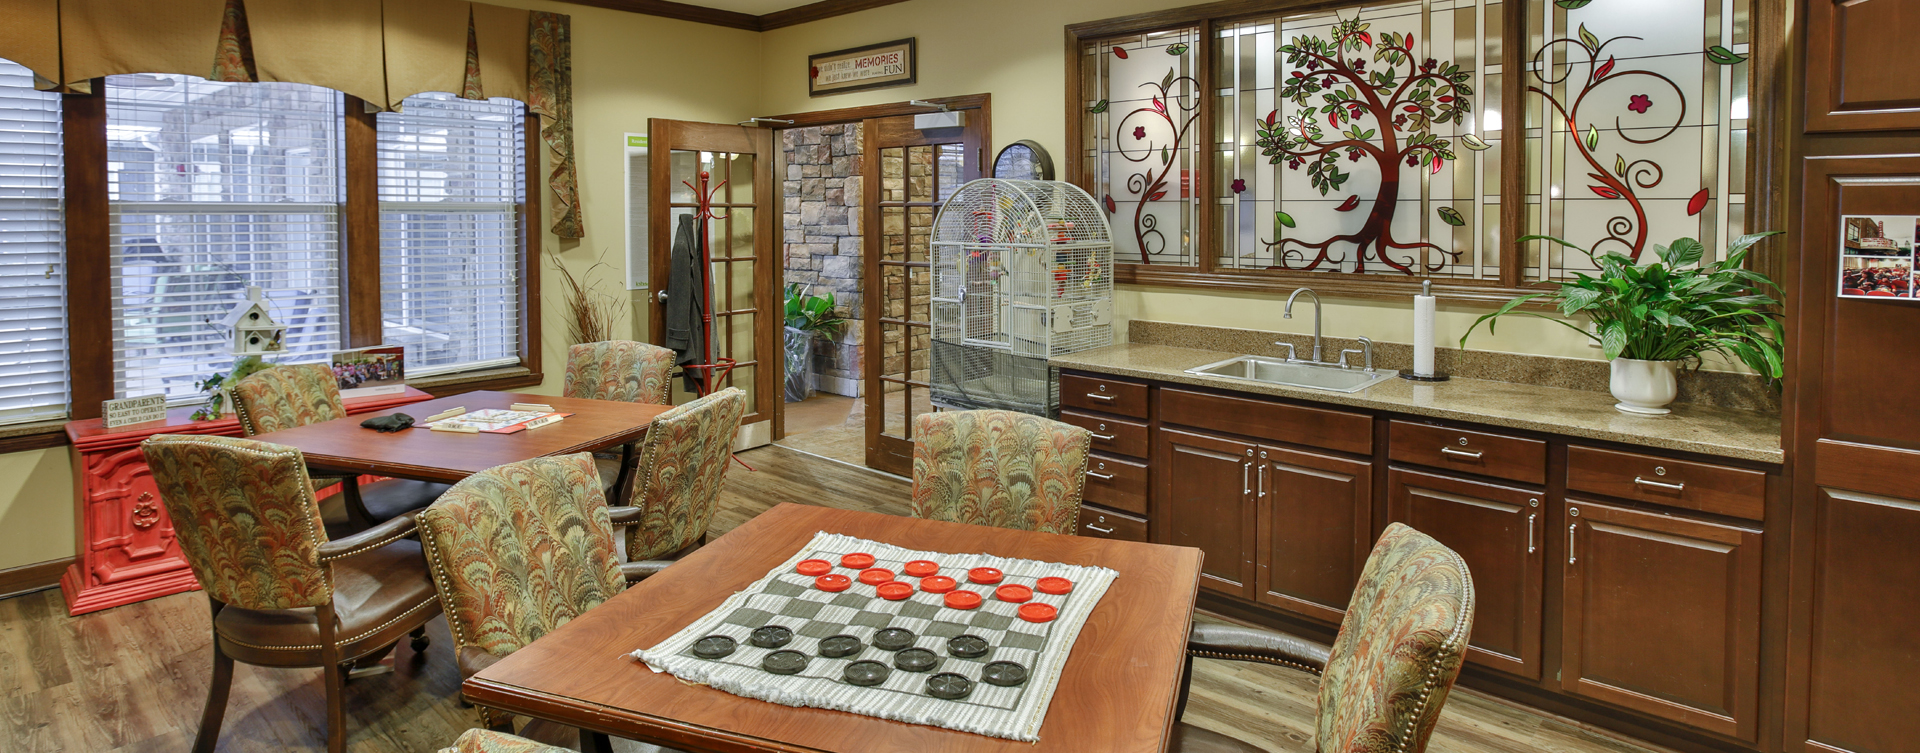 Relax with a good puzzle in the activity room at Bickford of Crown Point